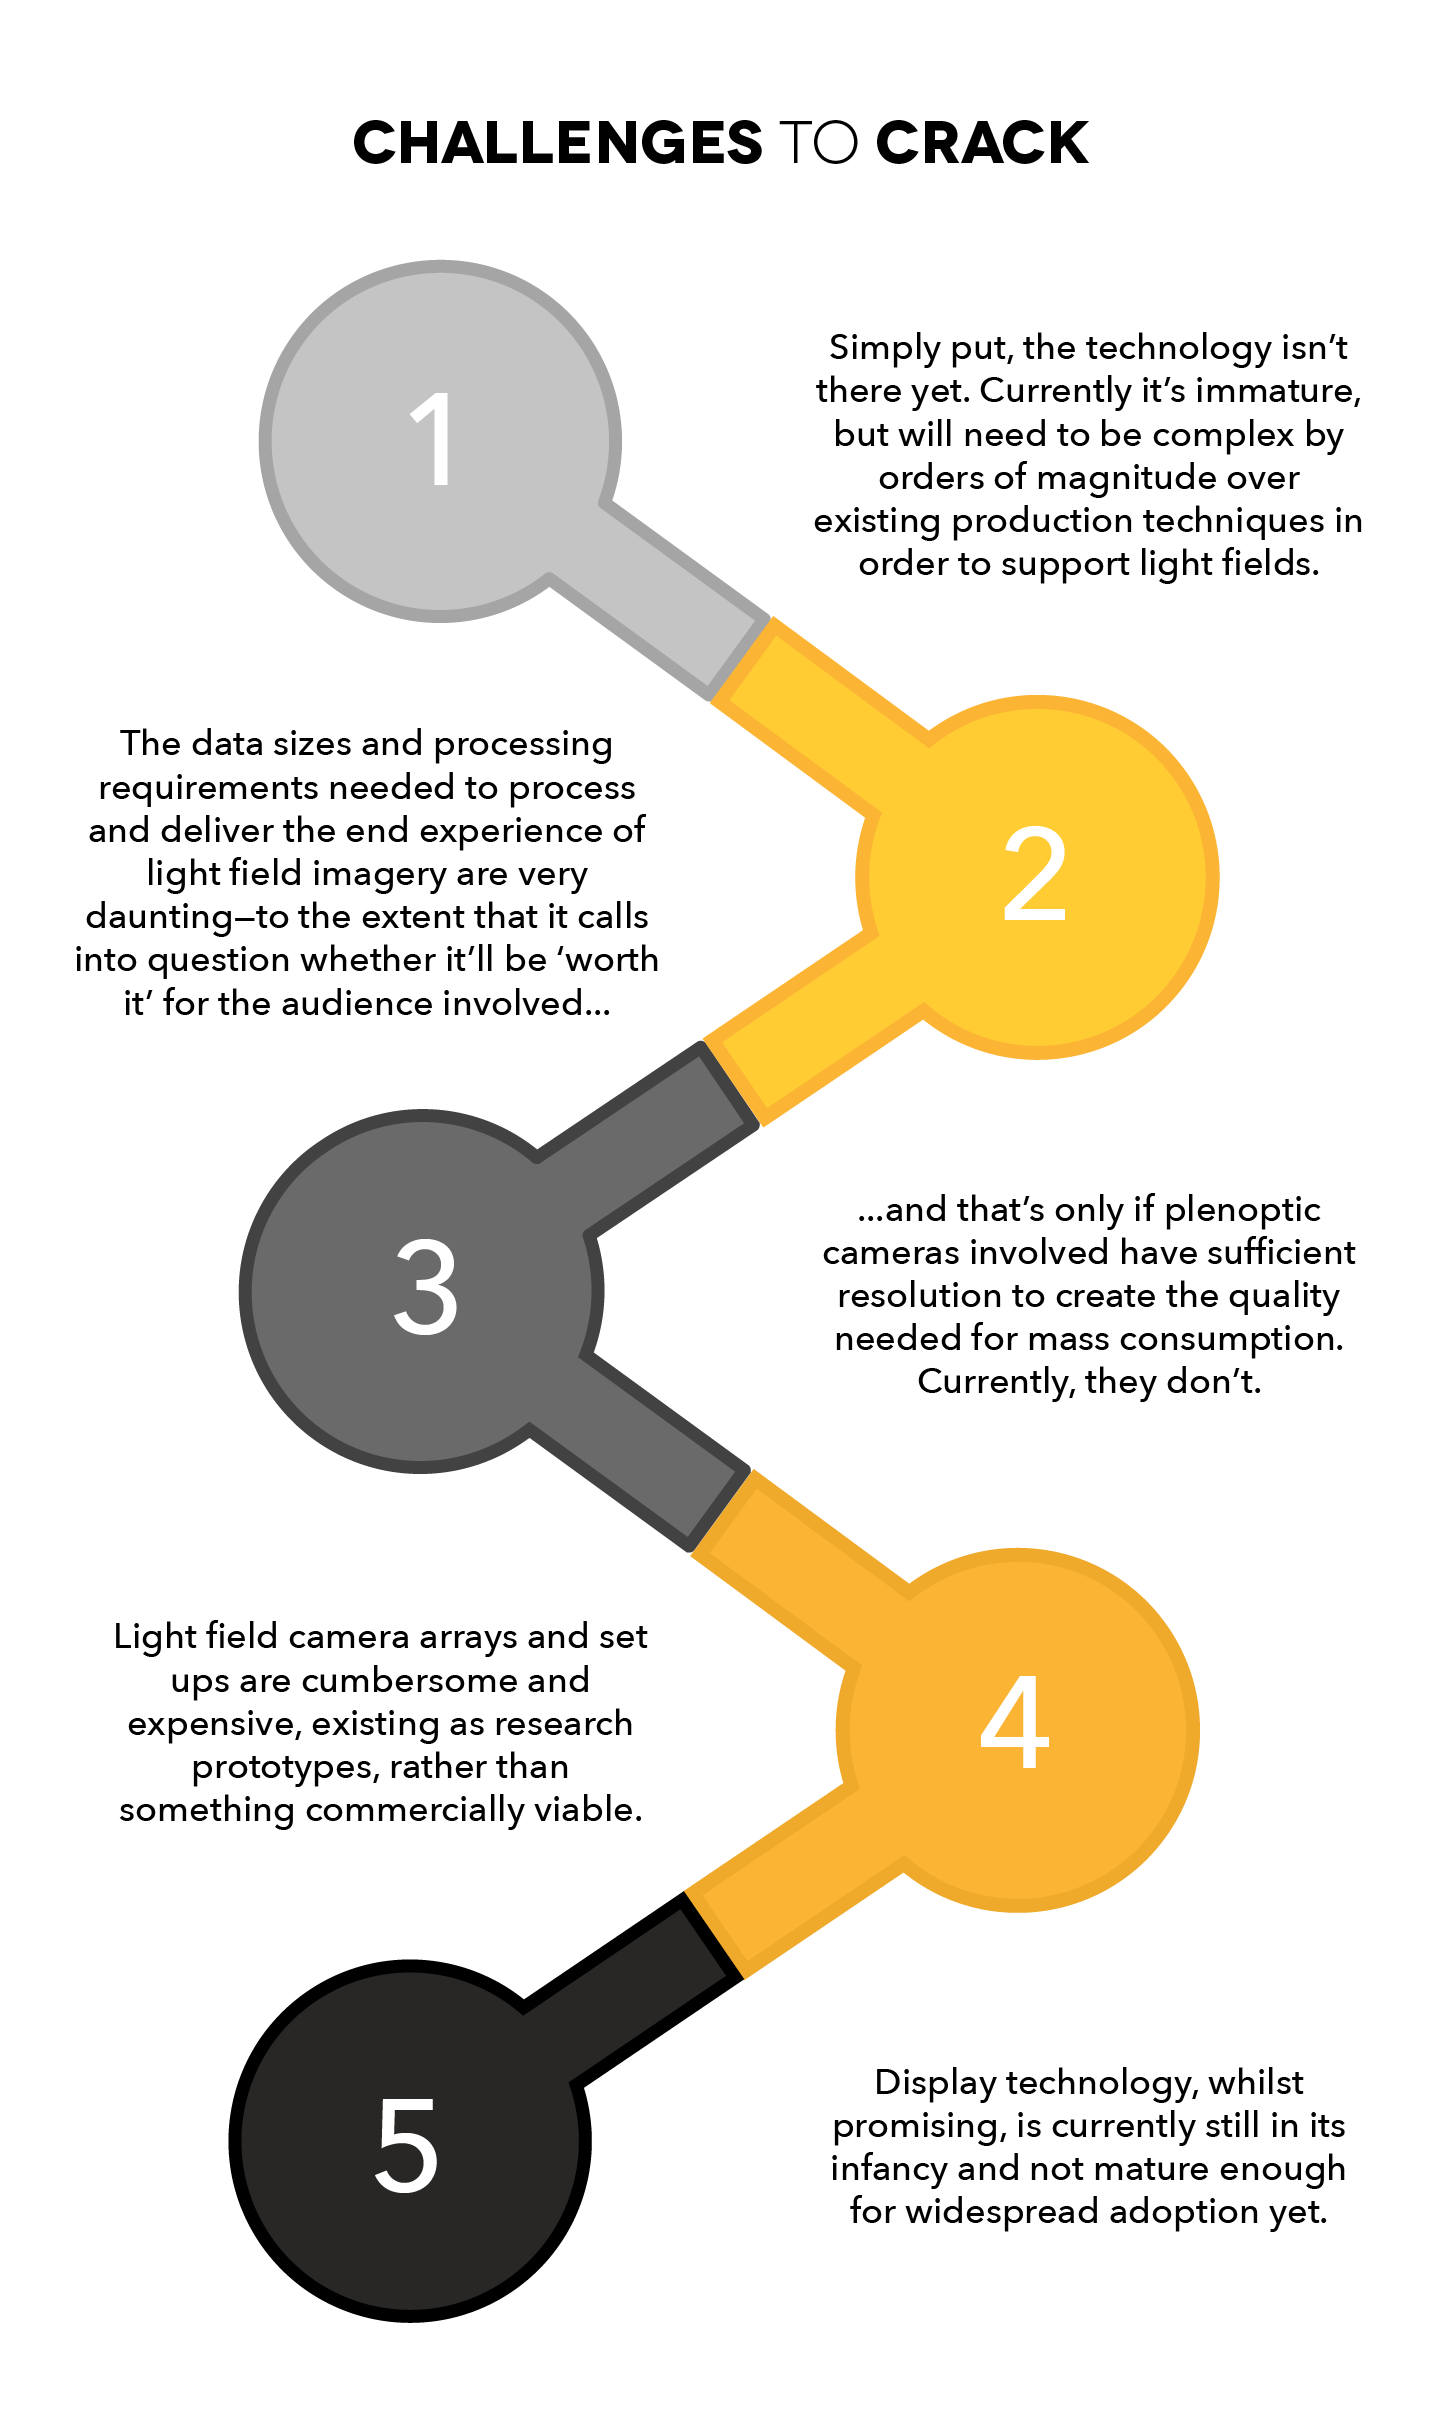 Main 5 challenges for light field technology, including massive data sizes for light field rendering, cumbersome multi camera arrays and camera positions, and how to harness high resolution data.